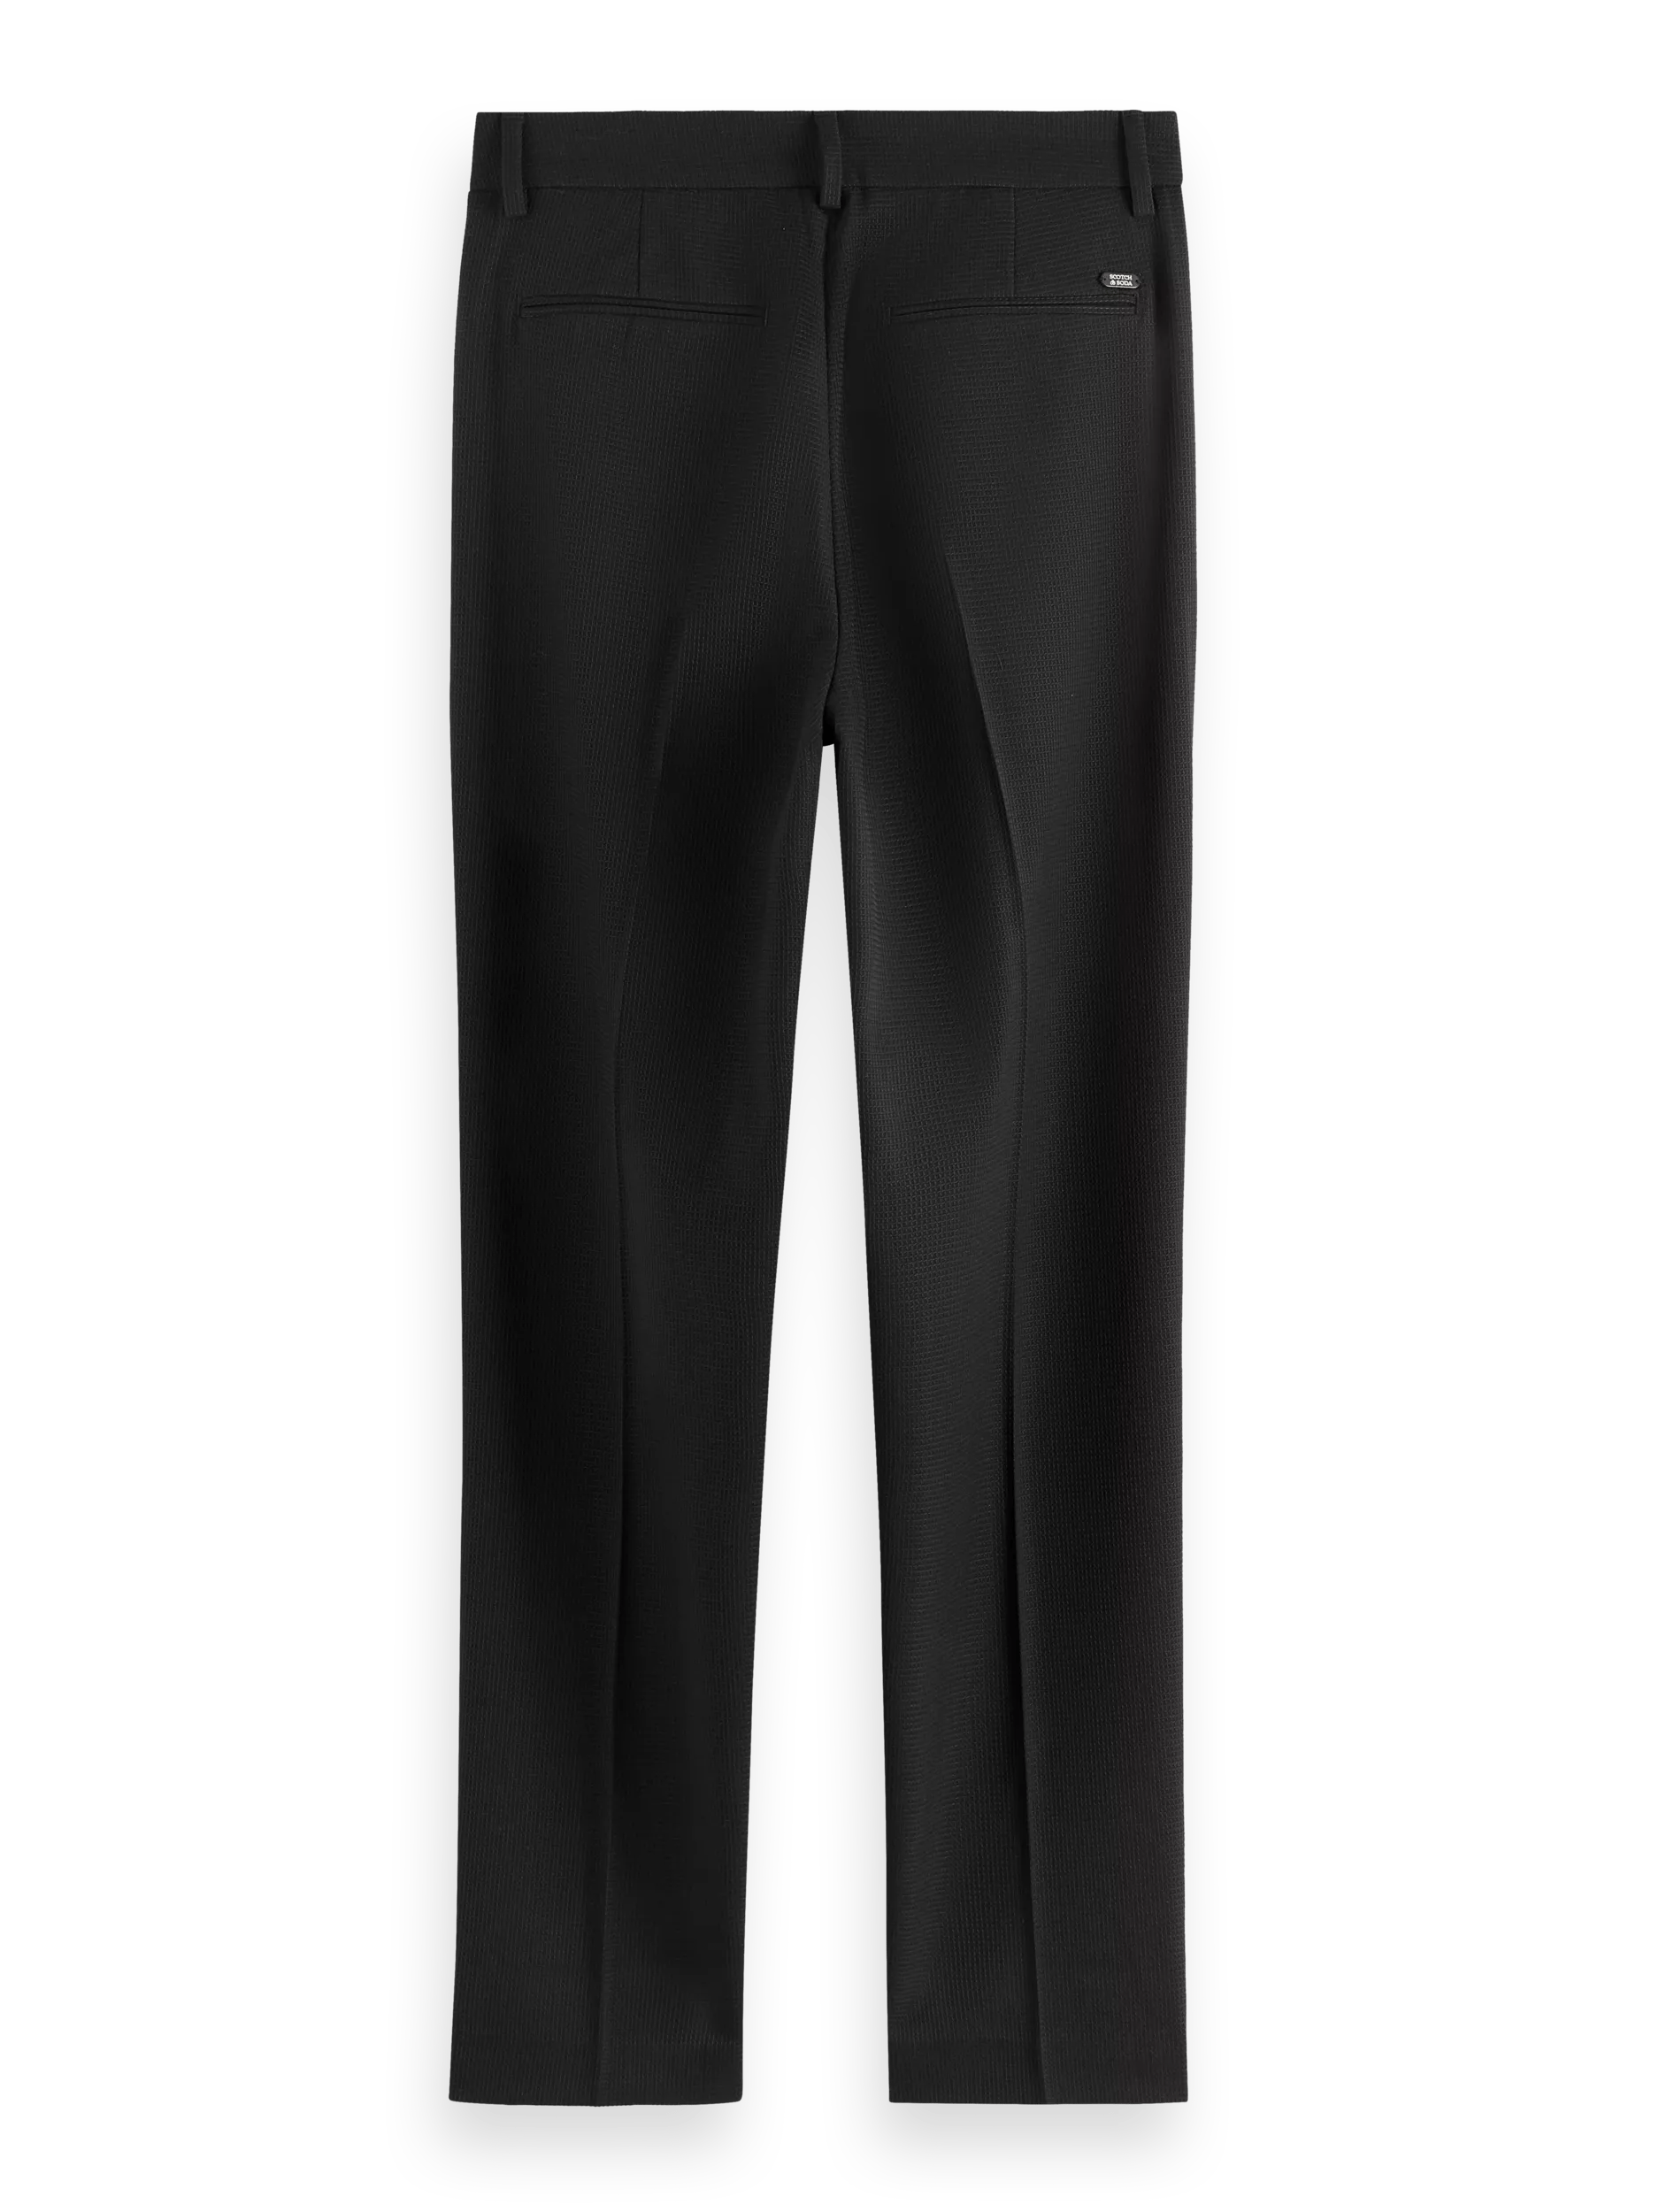 Scotch & Soda The Lowry mid-rise slim fit trousers BCK